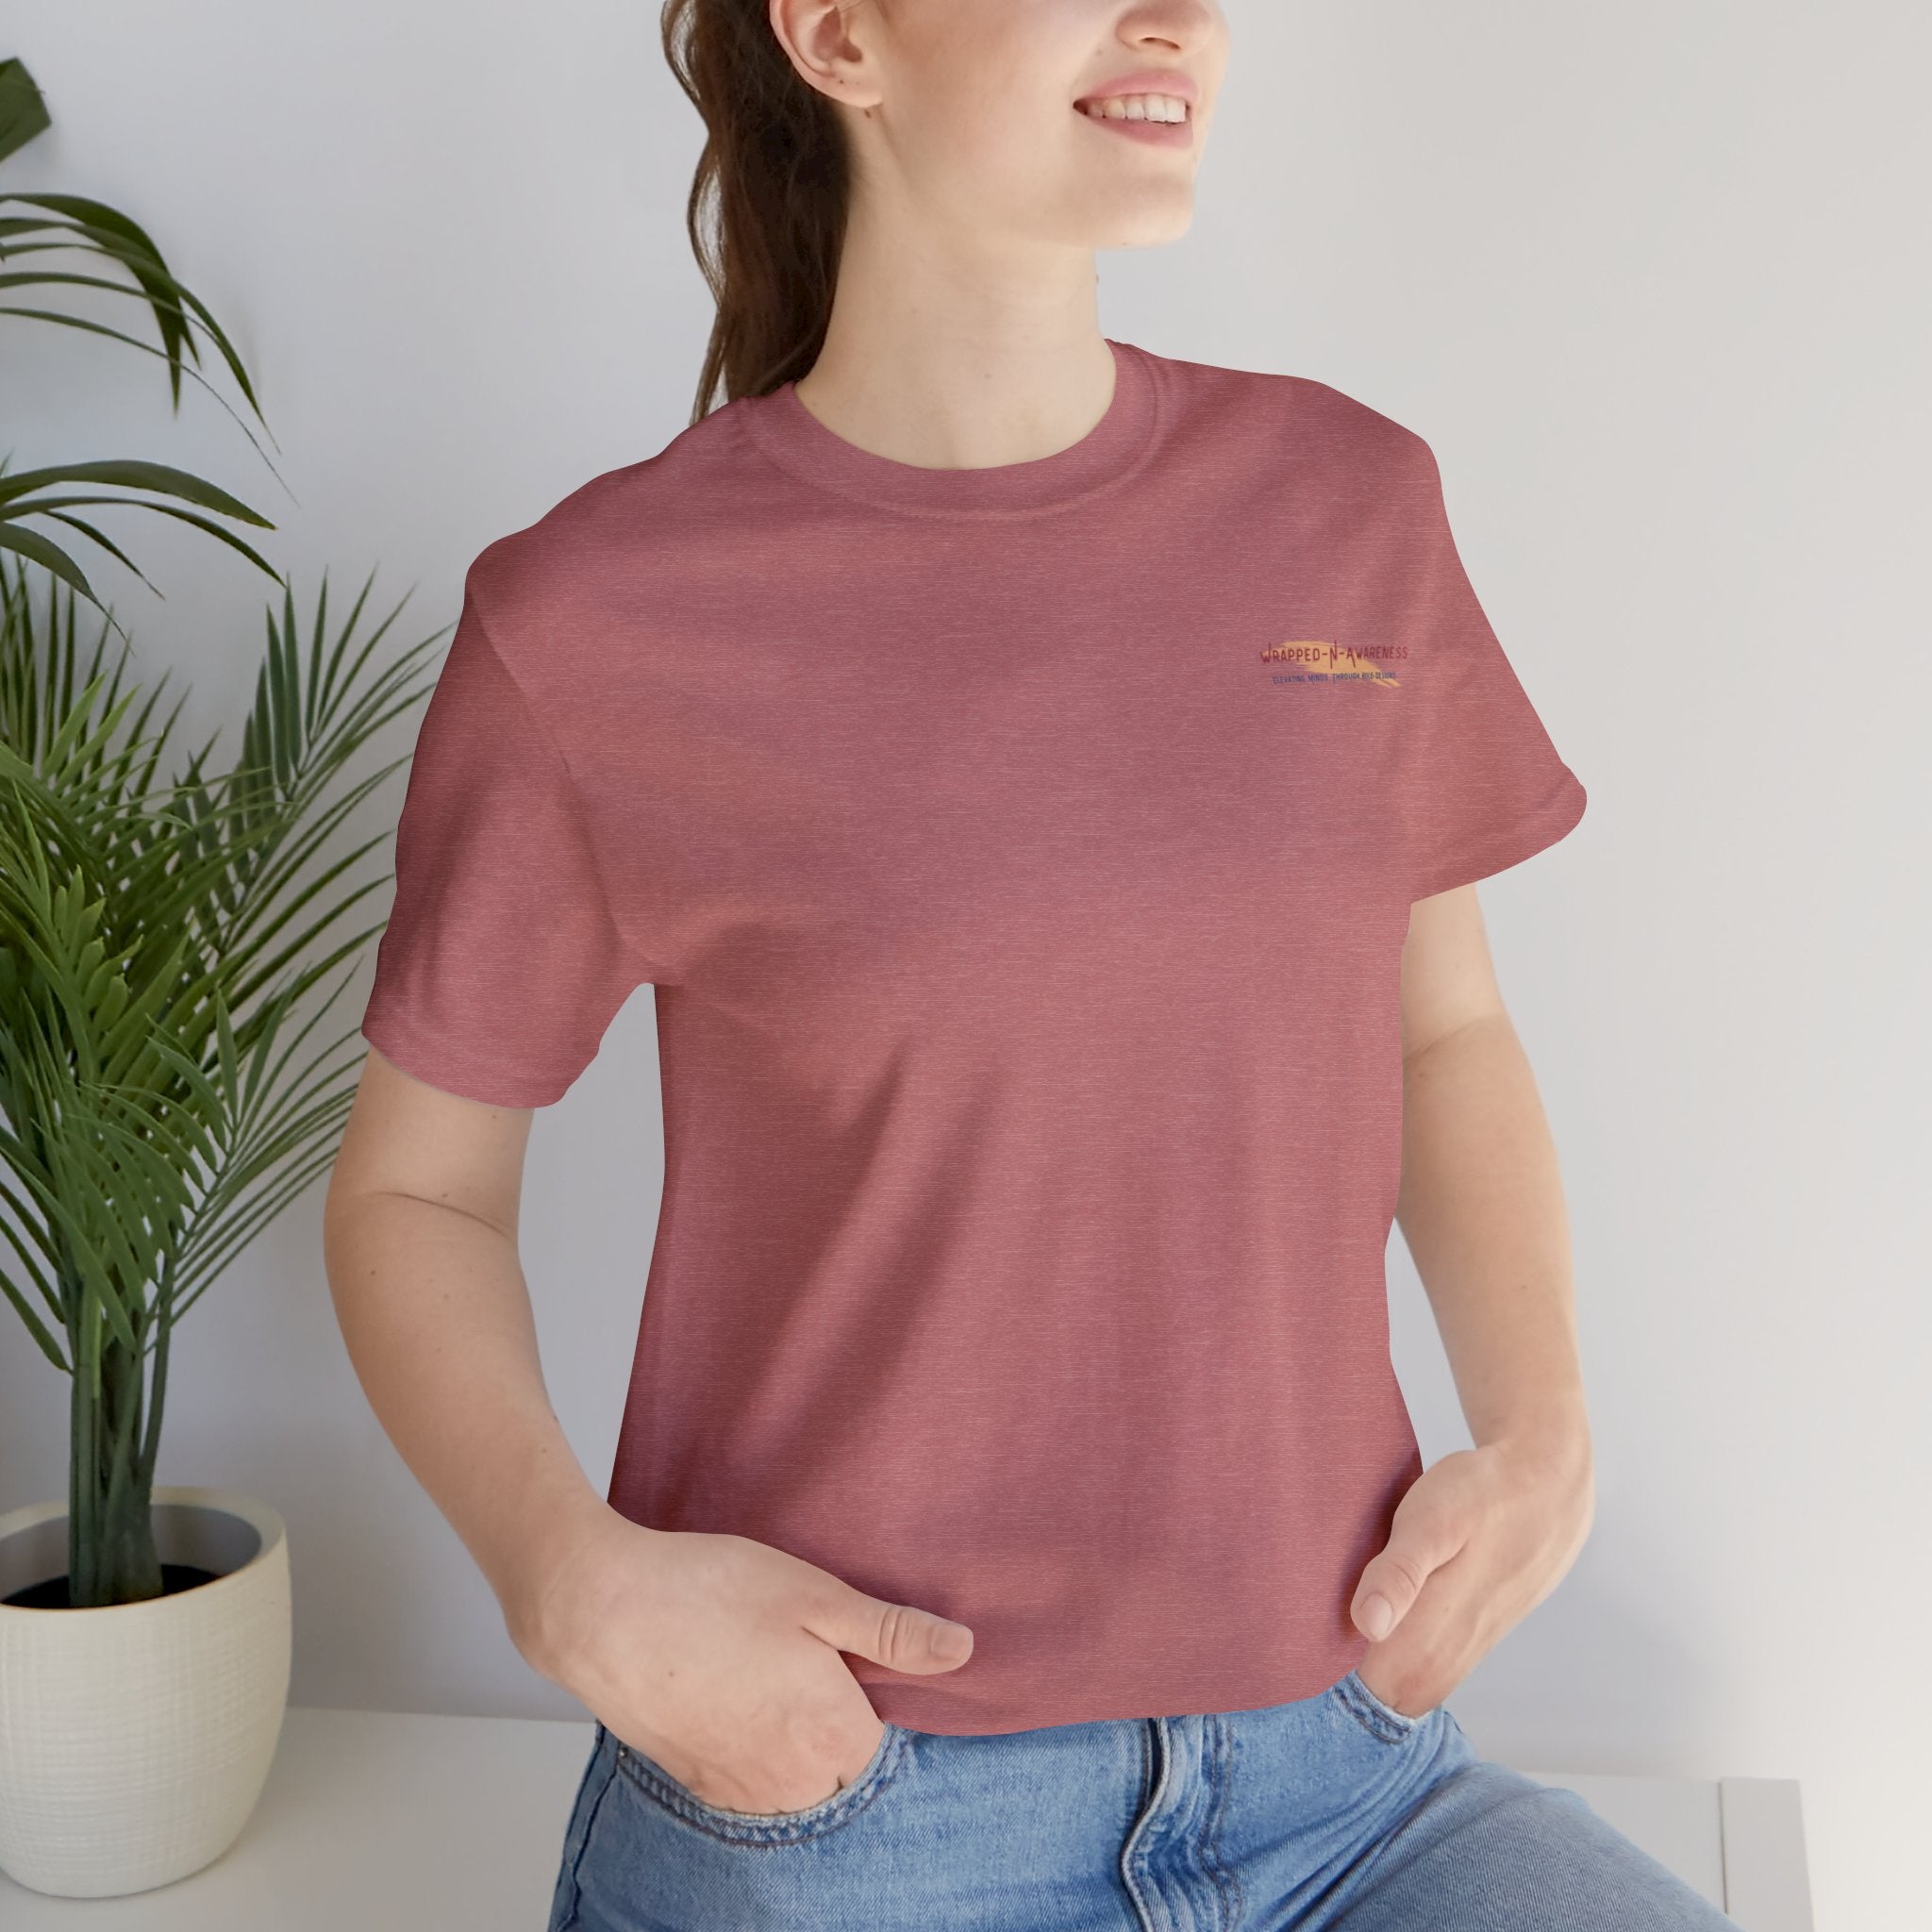 You Are Enough Short Sleeve Tee Bella+Canvas 3001 Heather Mauve Airlume Cotton Bella+Canvas 3001 Crew Neckline Jersey Short Sleeve Lightweight Fabric Mental Health Support Retail Fit Tear-away Label Tee Unisex Tee T-Shirt 8791298073555640021_2048 Printify